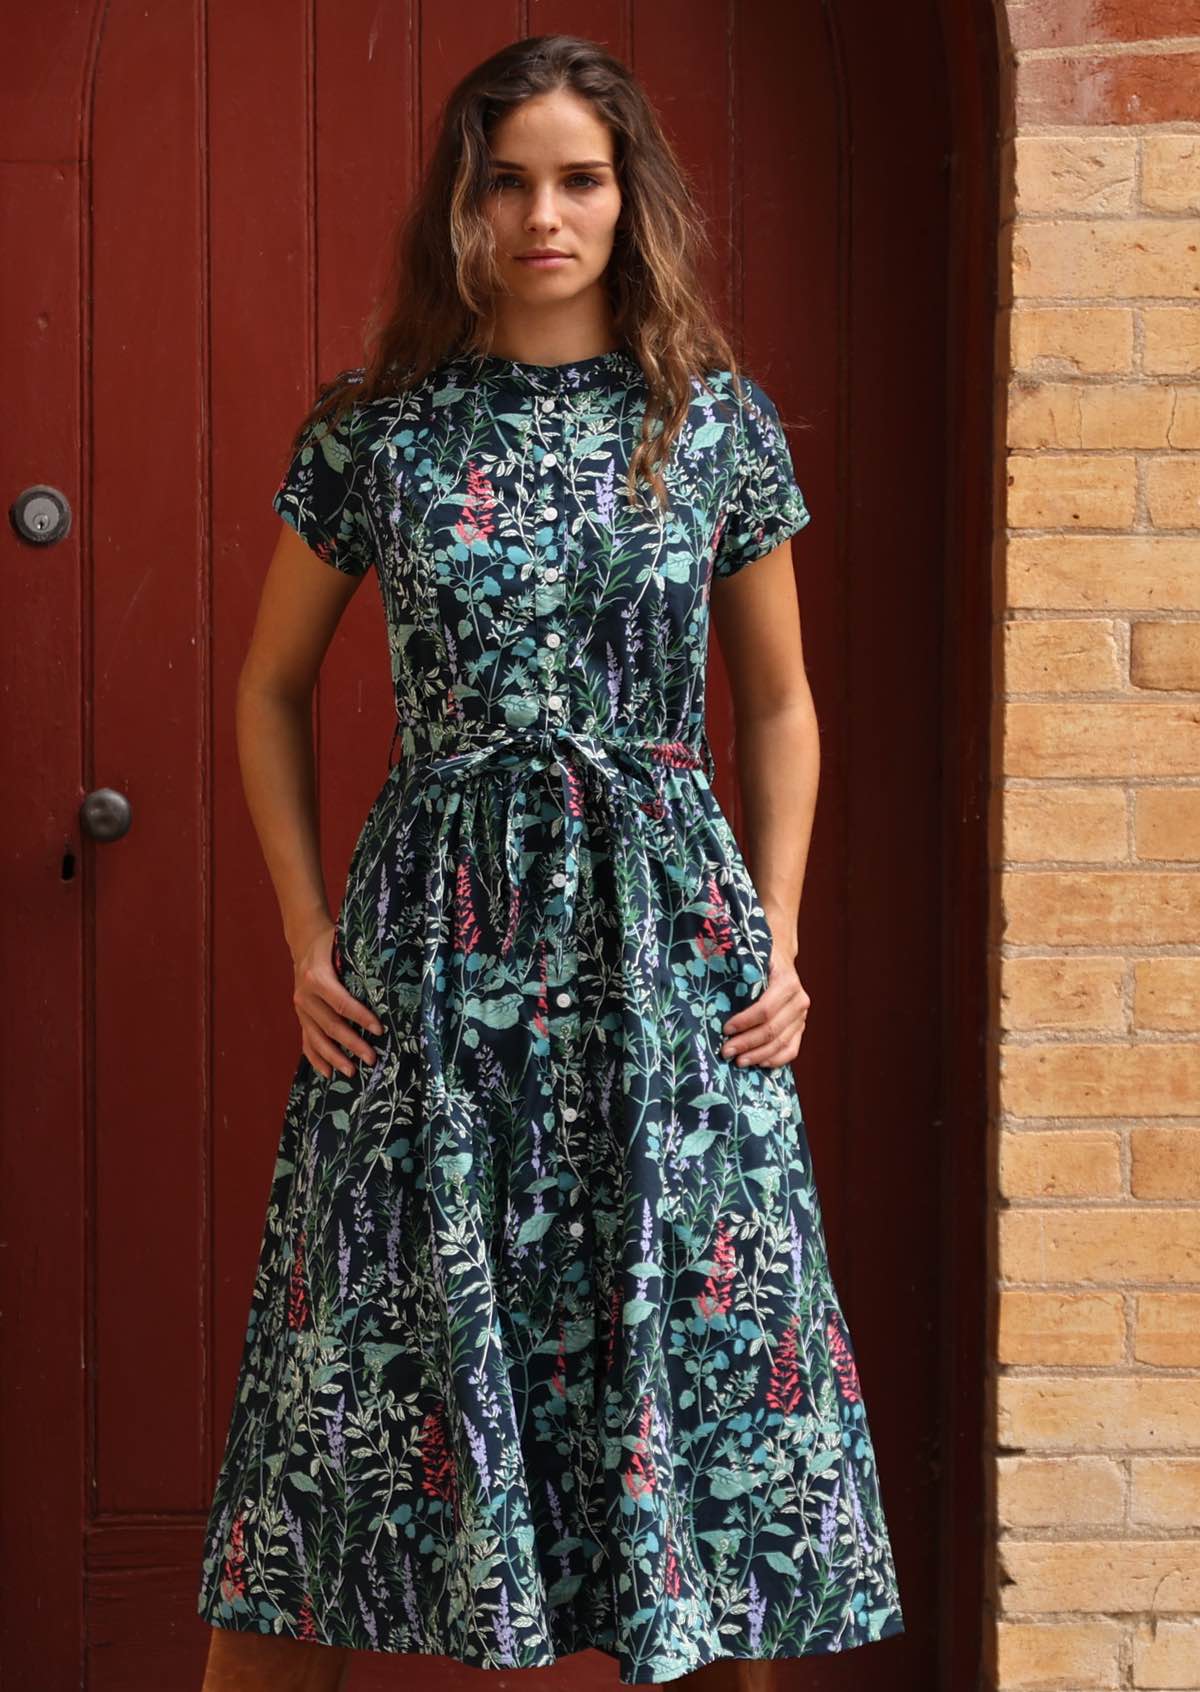 Cotton retro dress with waist tie and hidden side pockets